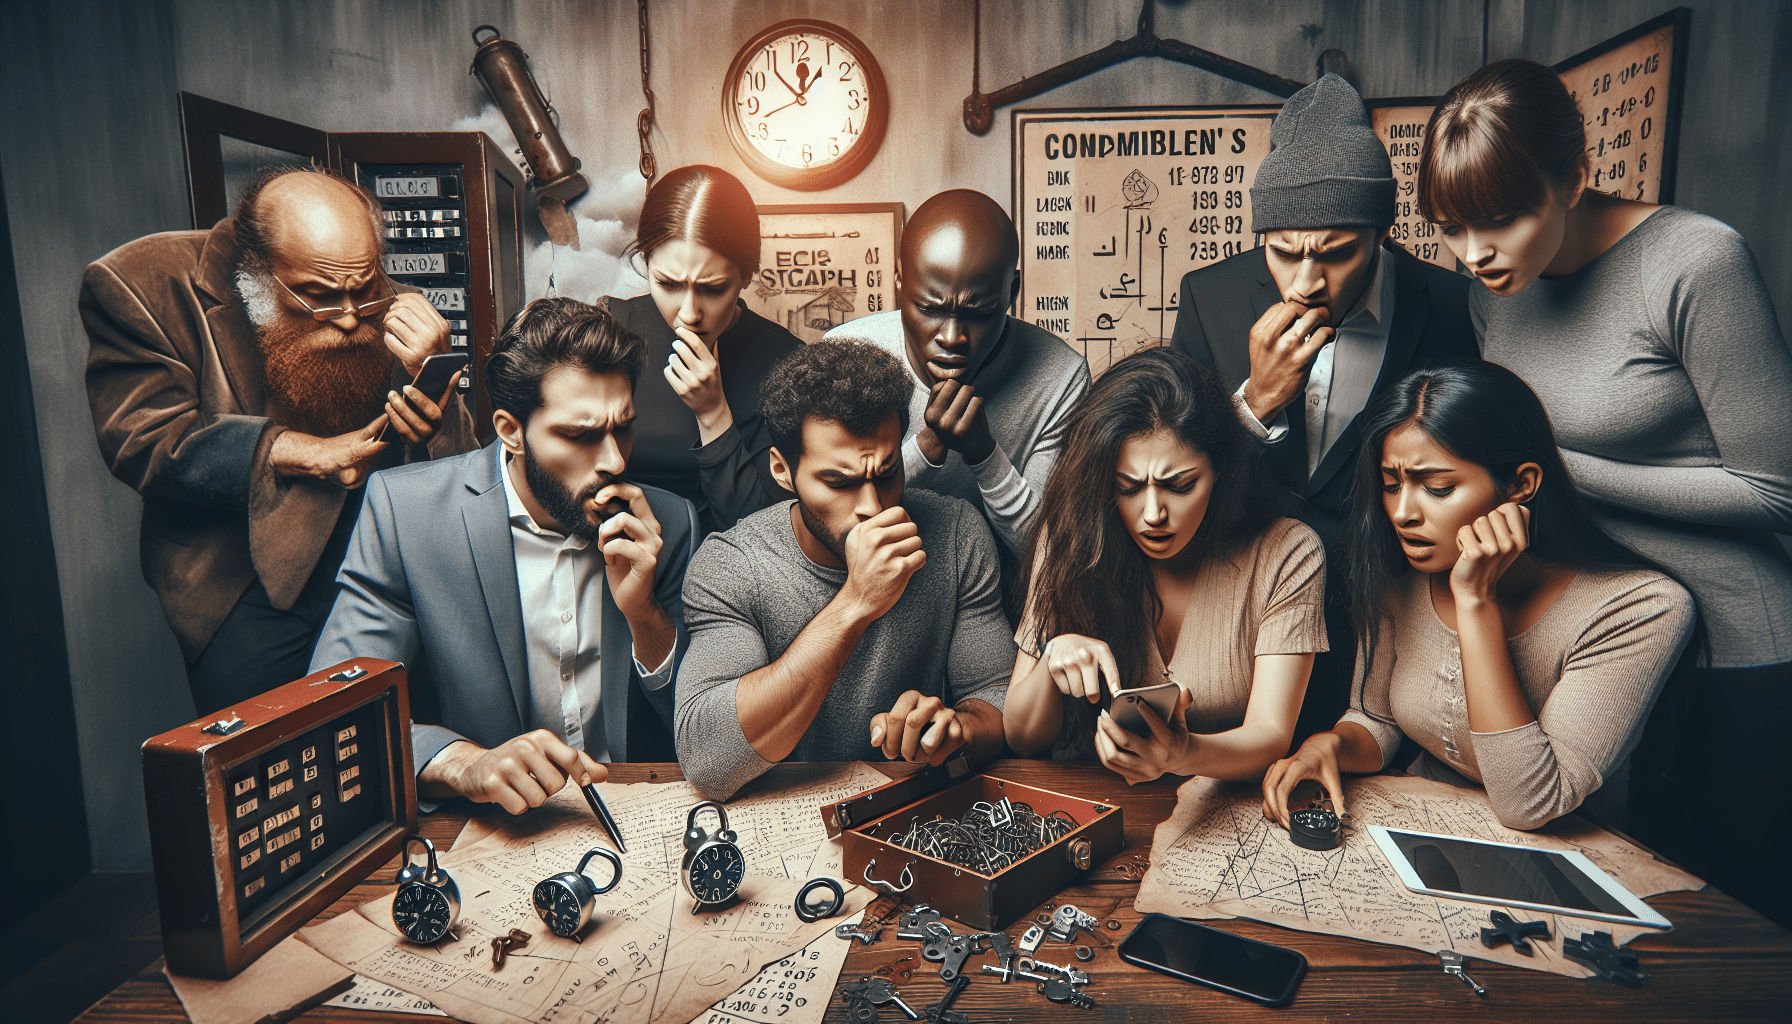 How Many People Are Needed For An Escape Room?